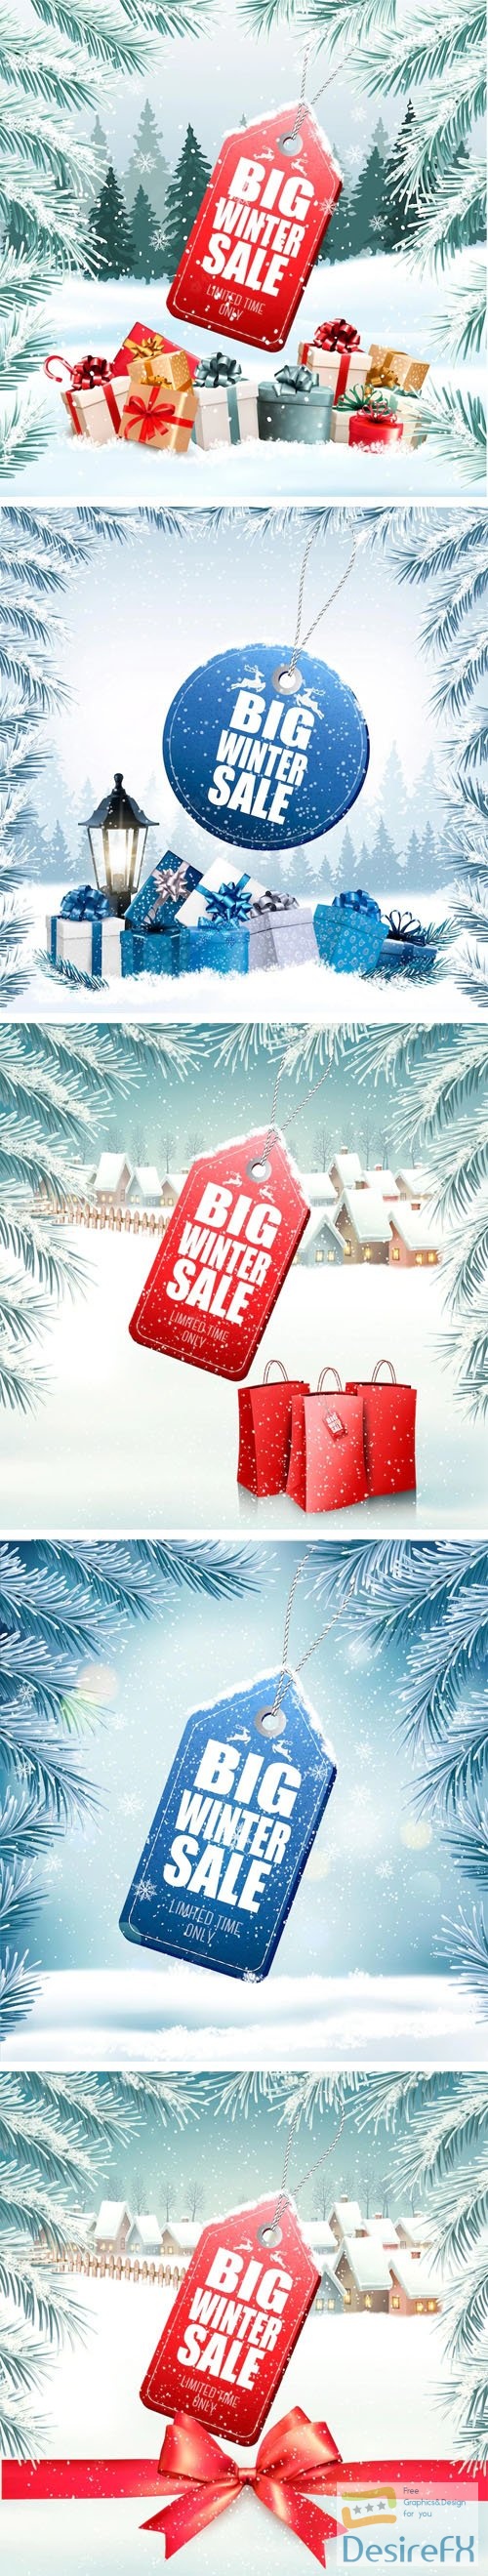 Winter Holiday Sales Tags on Snowy Weather - Vector Templates